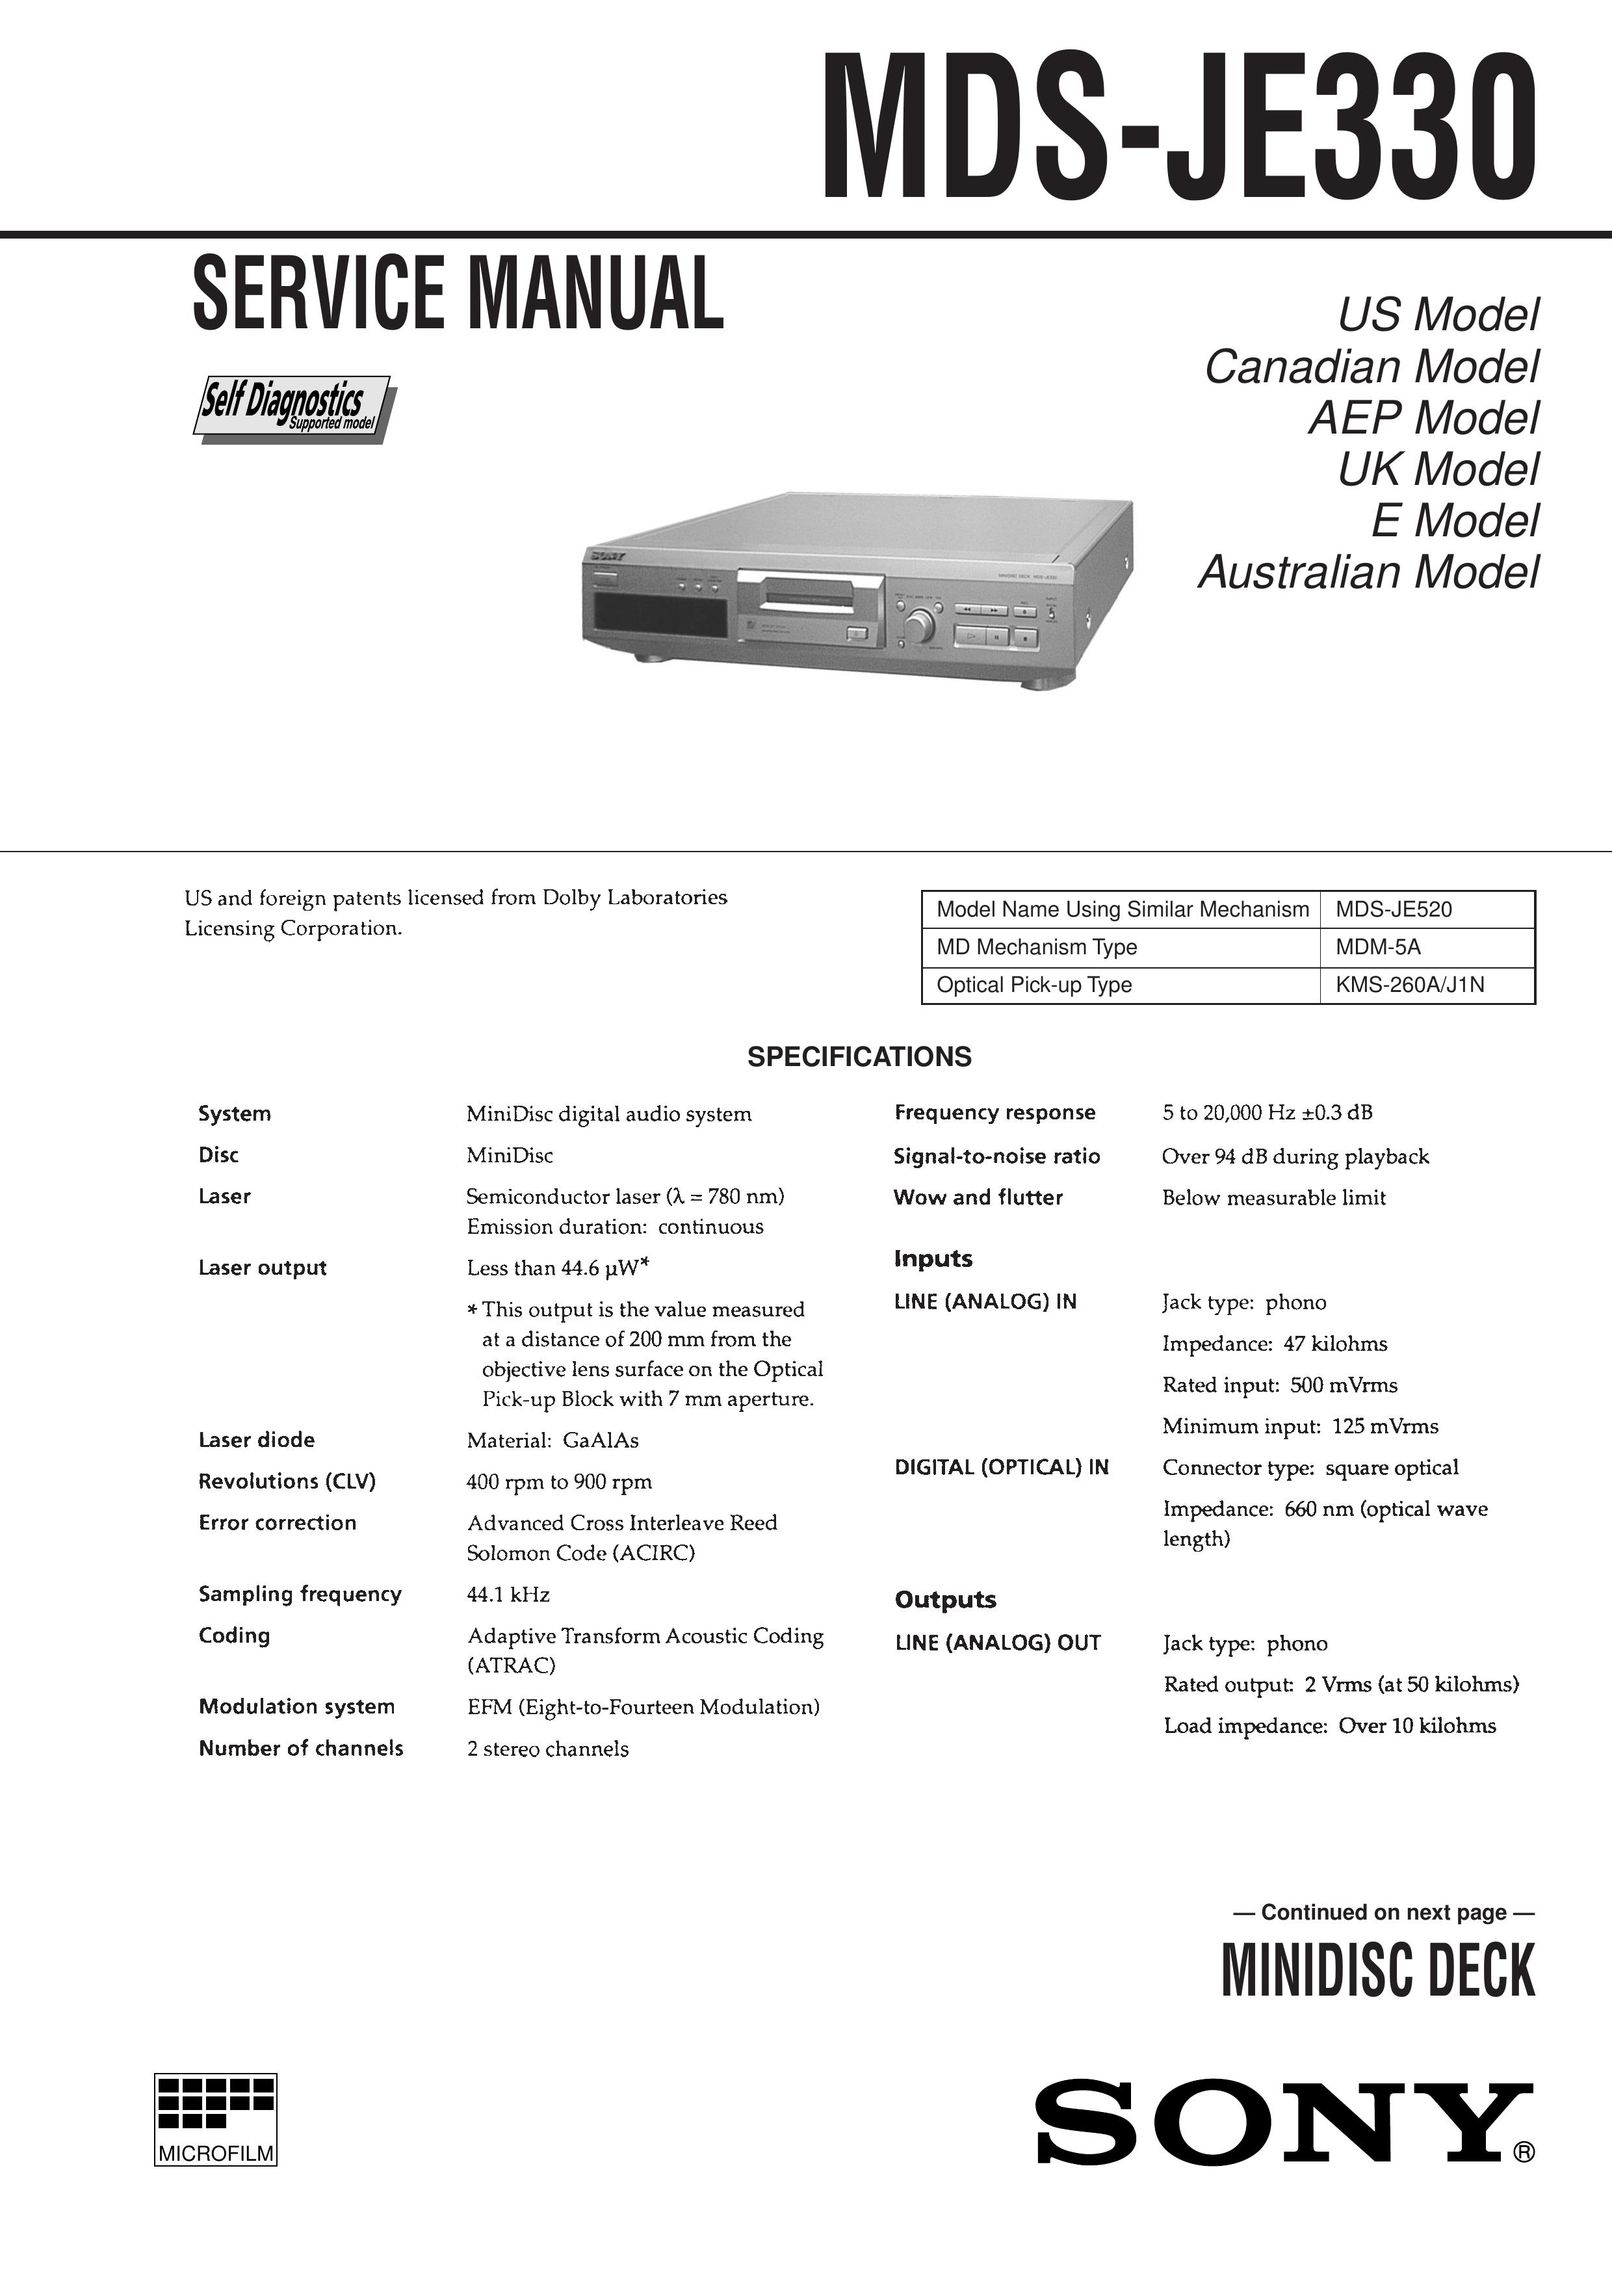 Sony 4-216-349-0 US model 4-216-349-1 Canadian model 4-216-349-2 AEP DVD Player User Manual